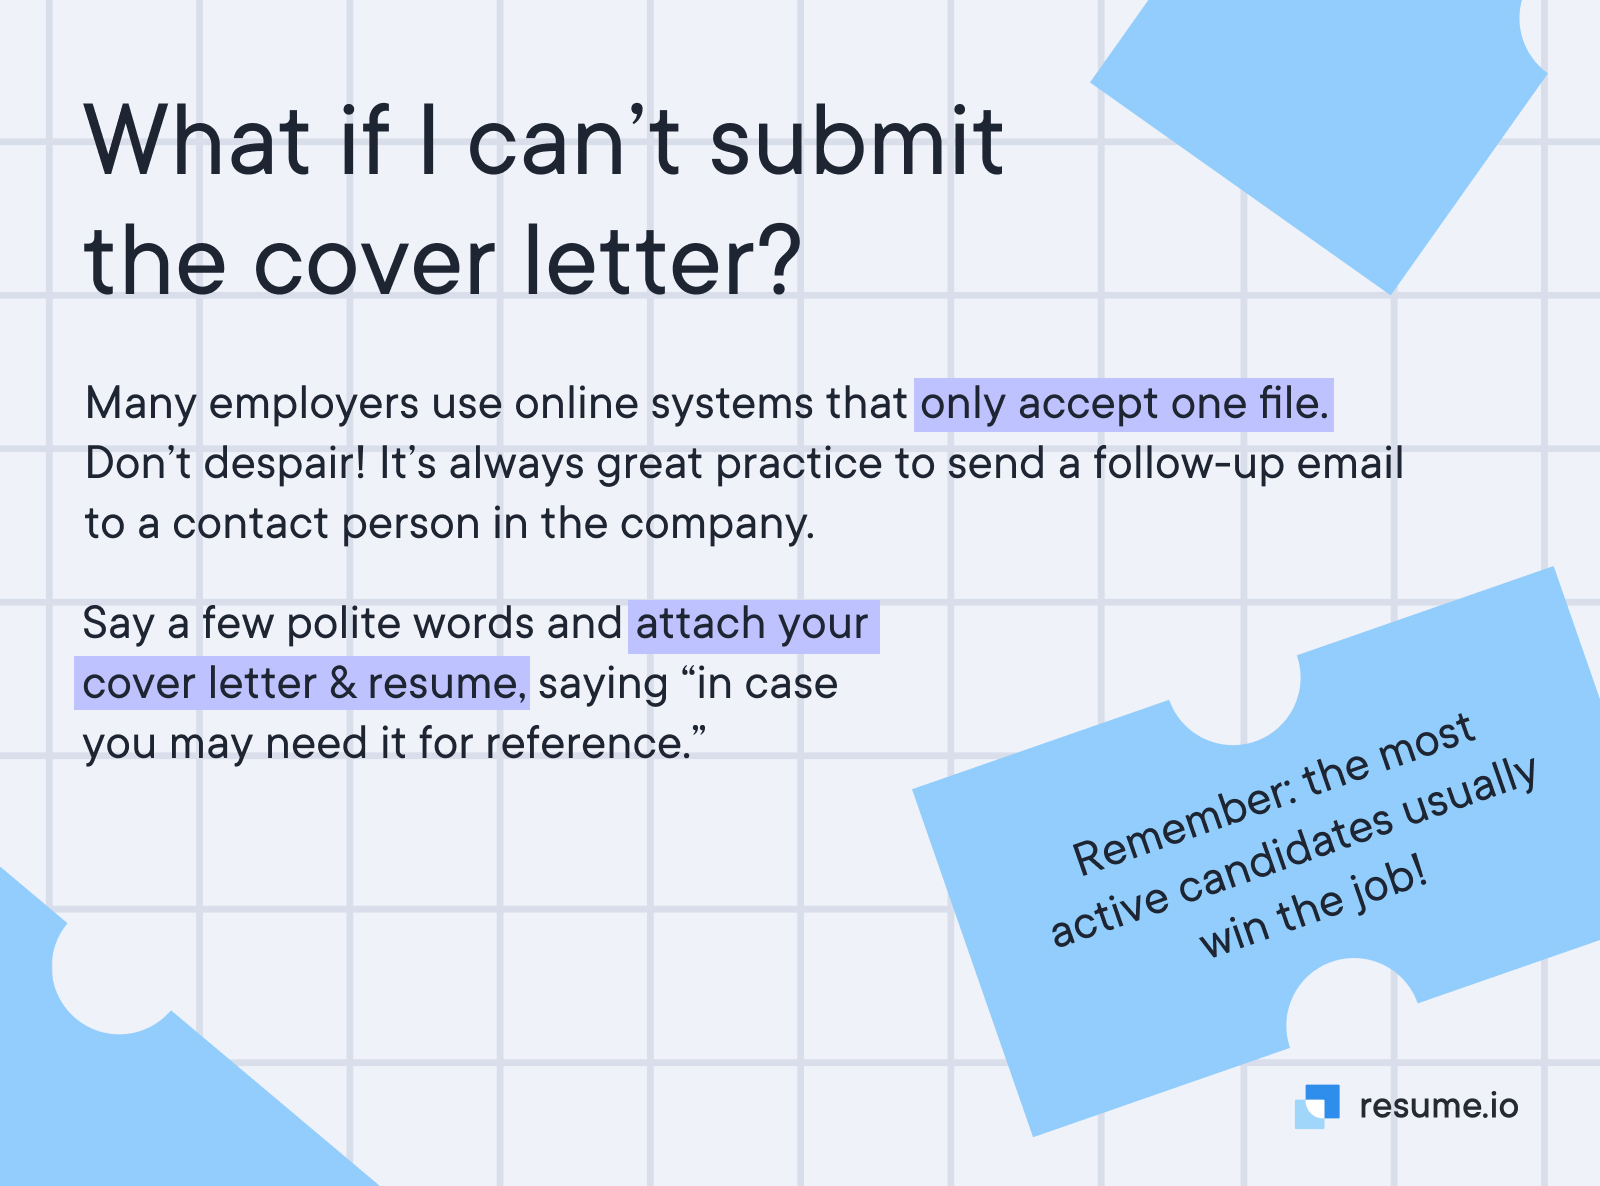 What if I can't submit the cover letter?